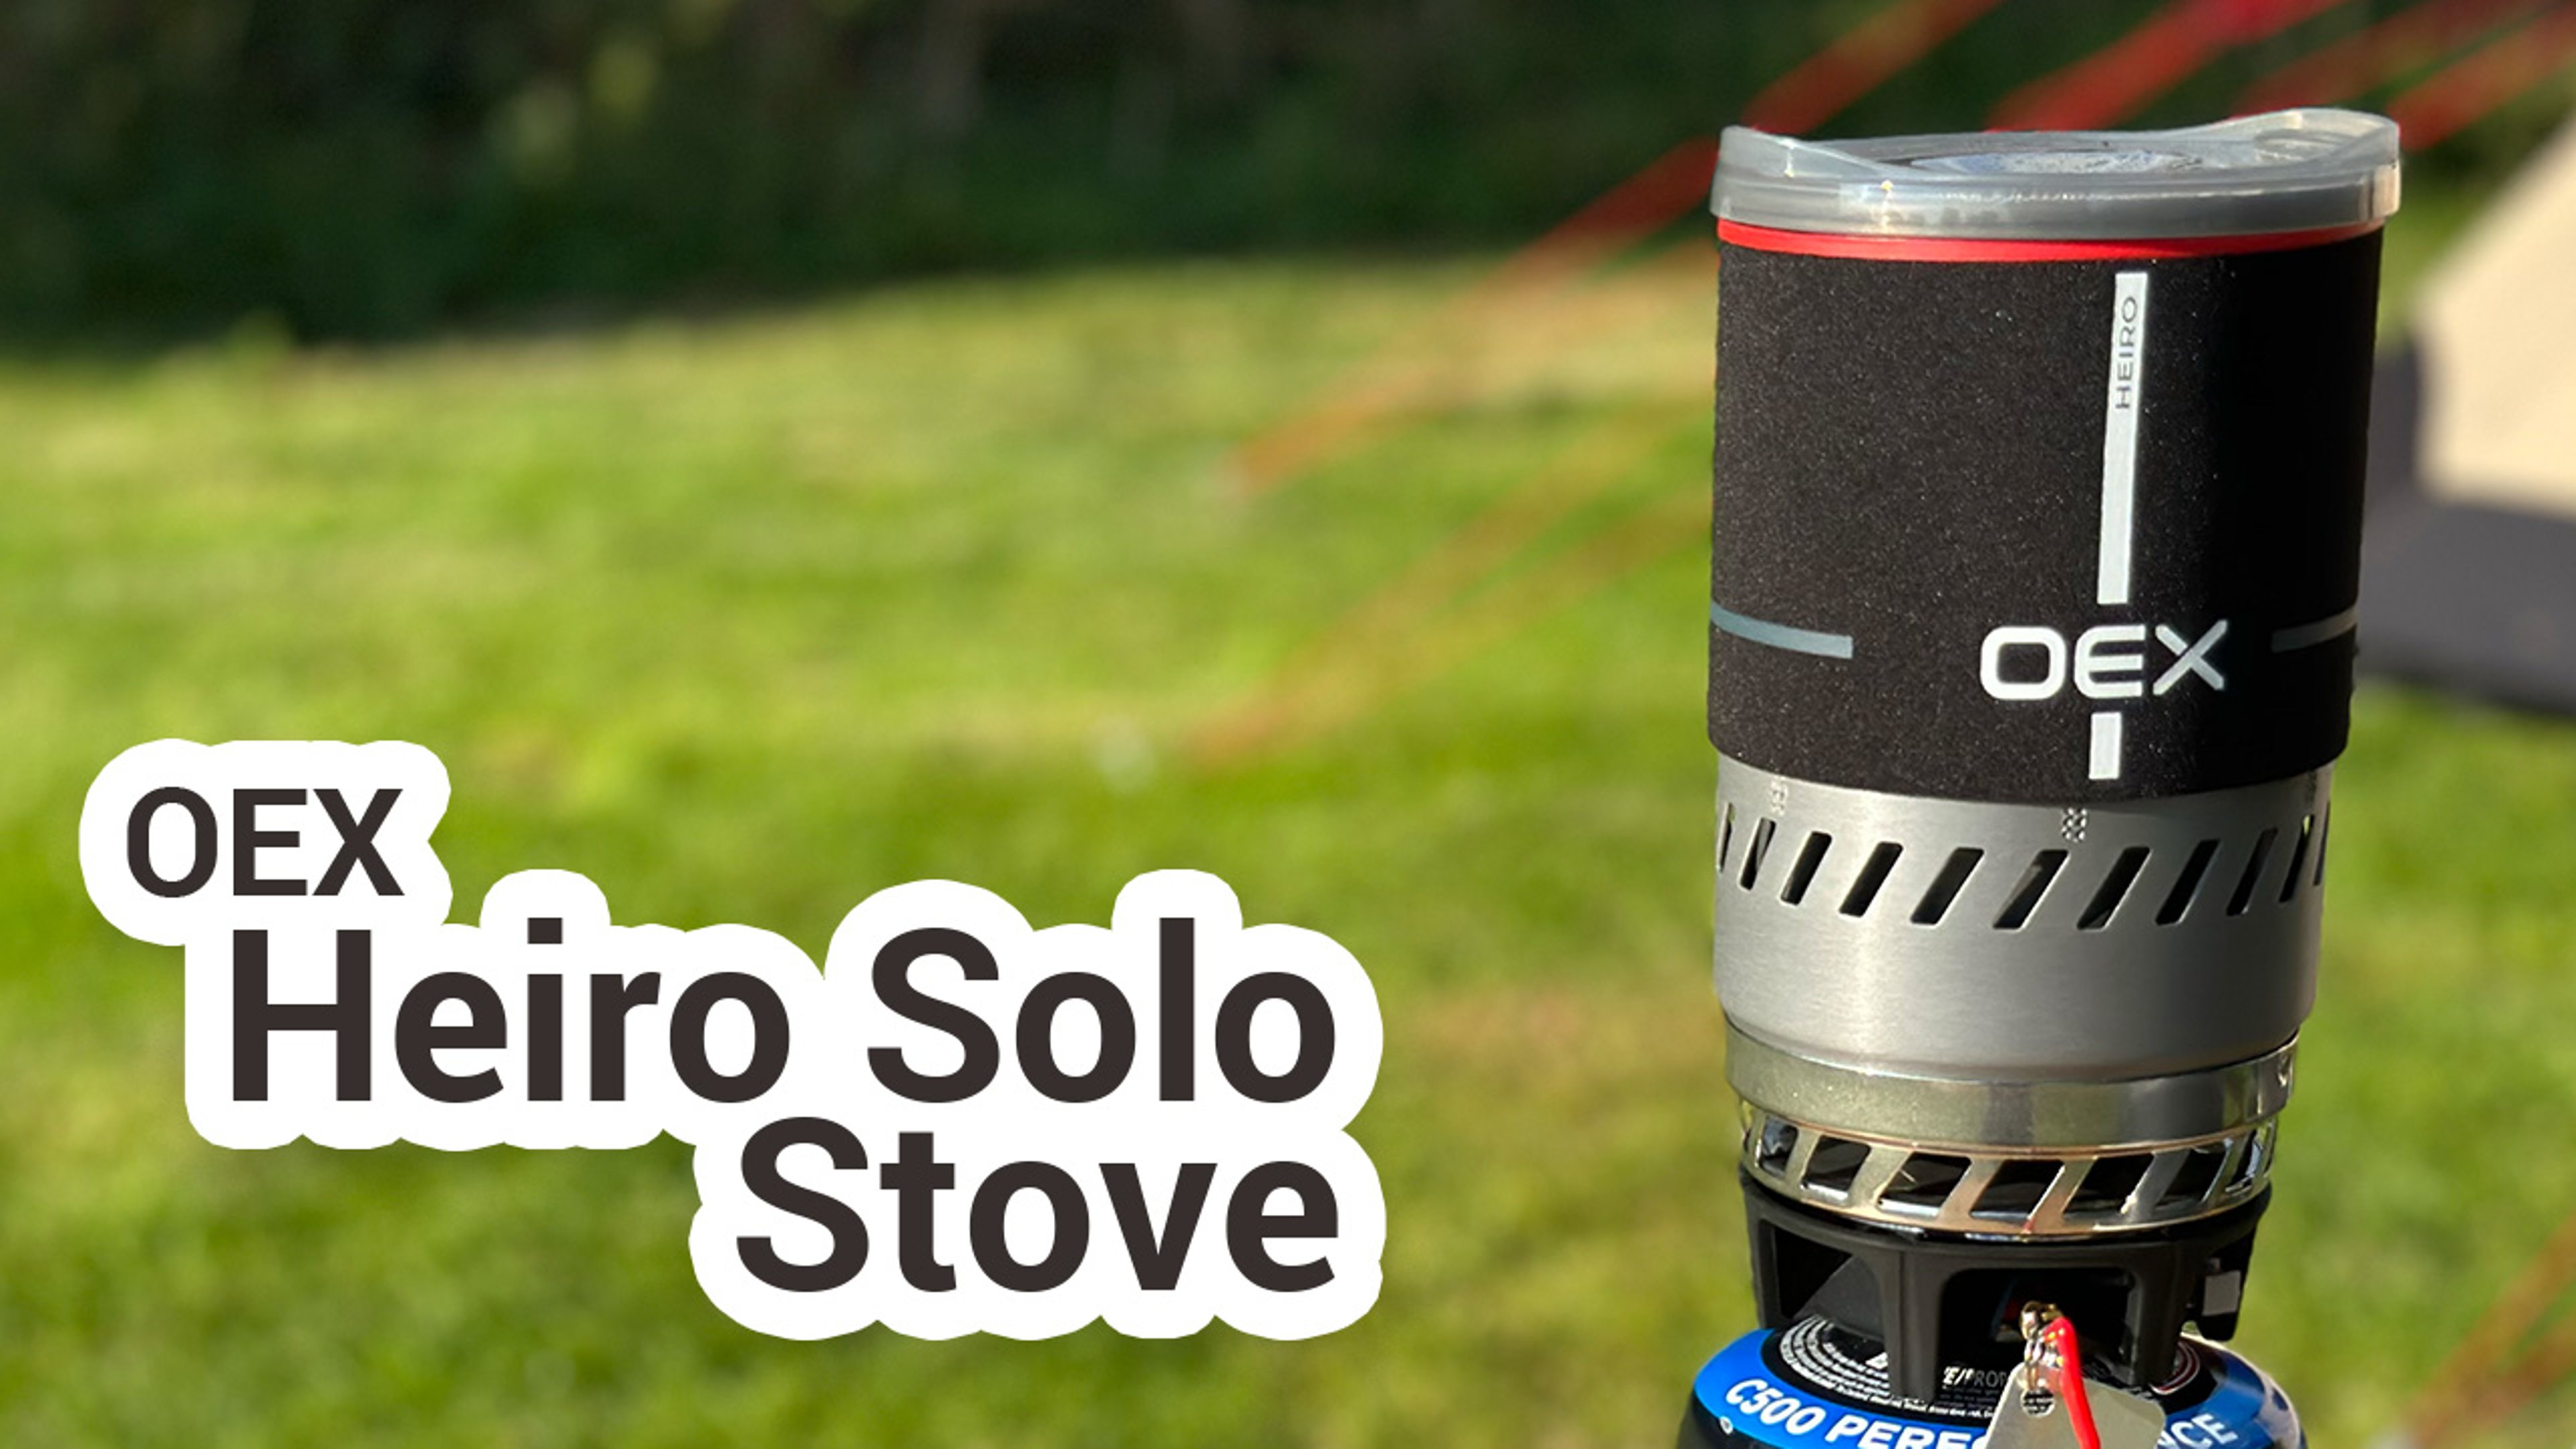 The OEX Heiro solo stove standing upright